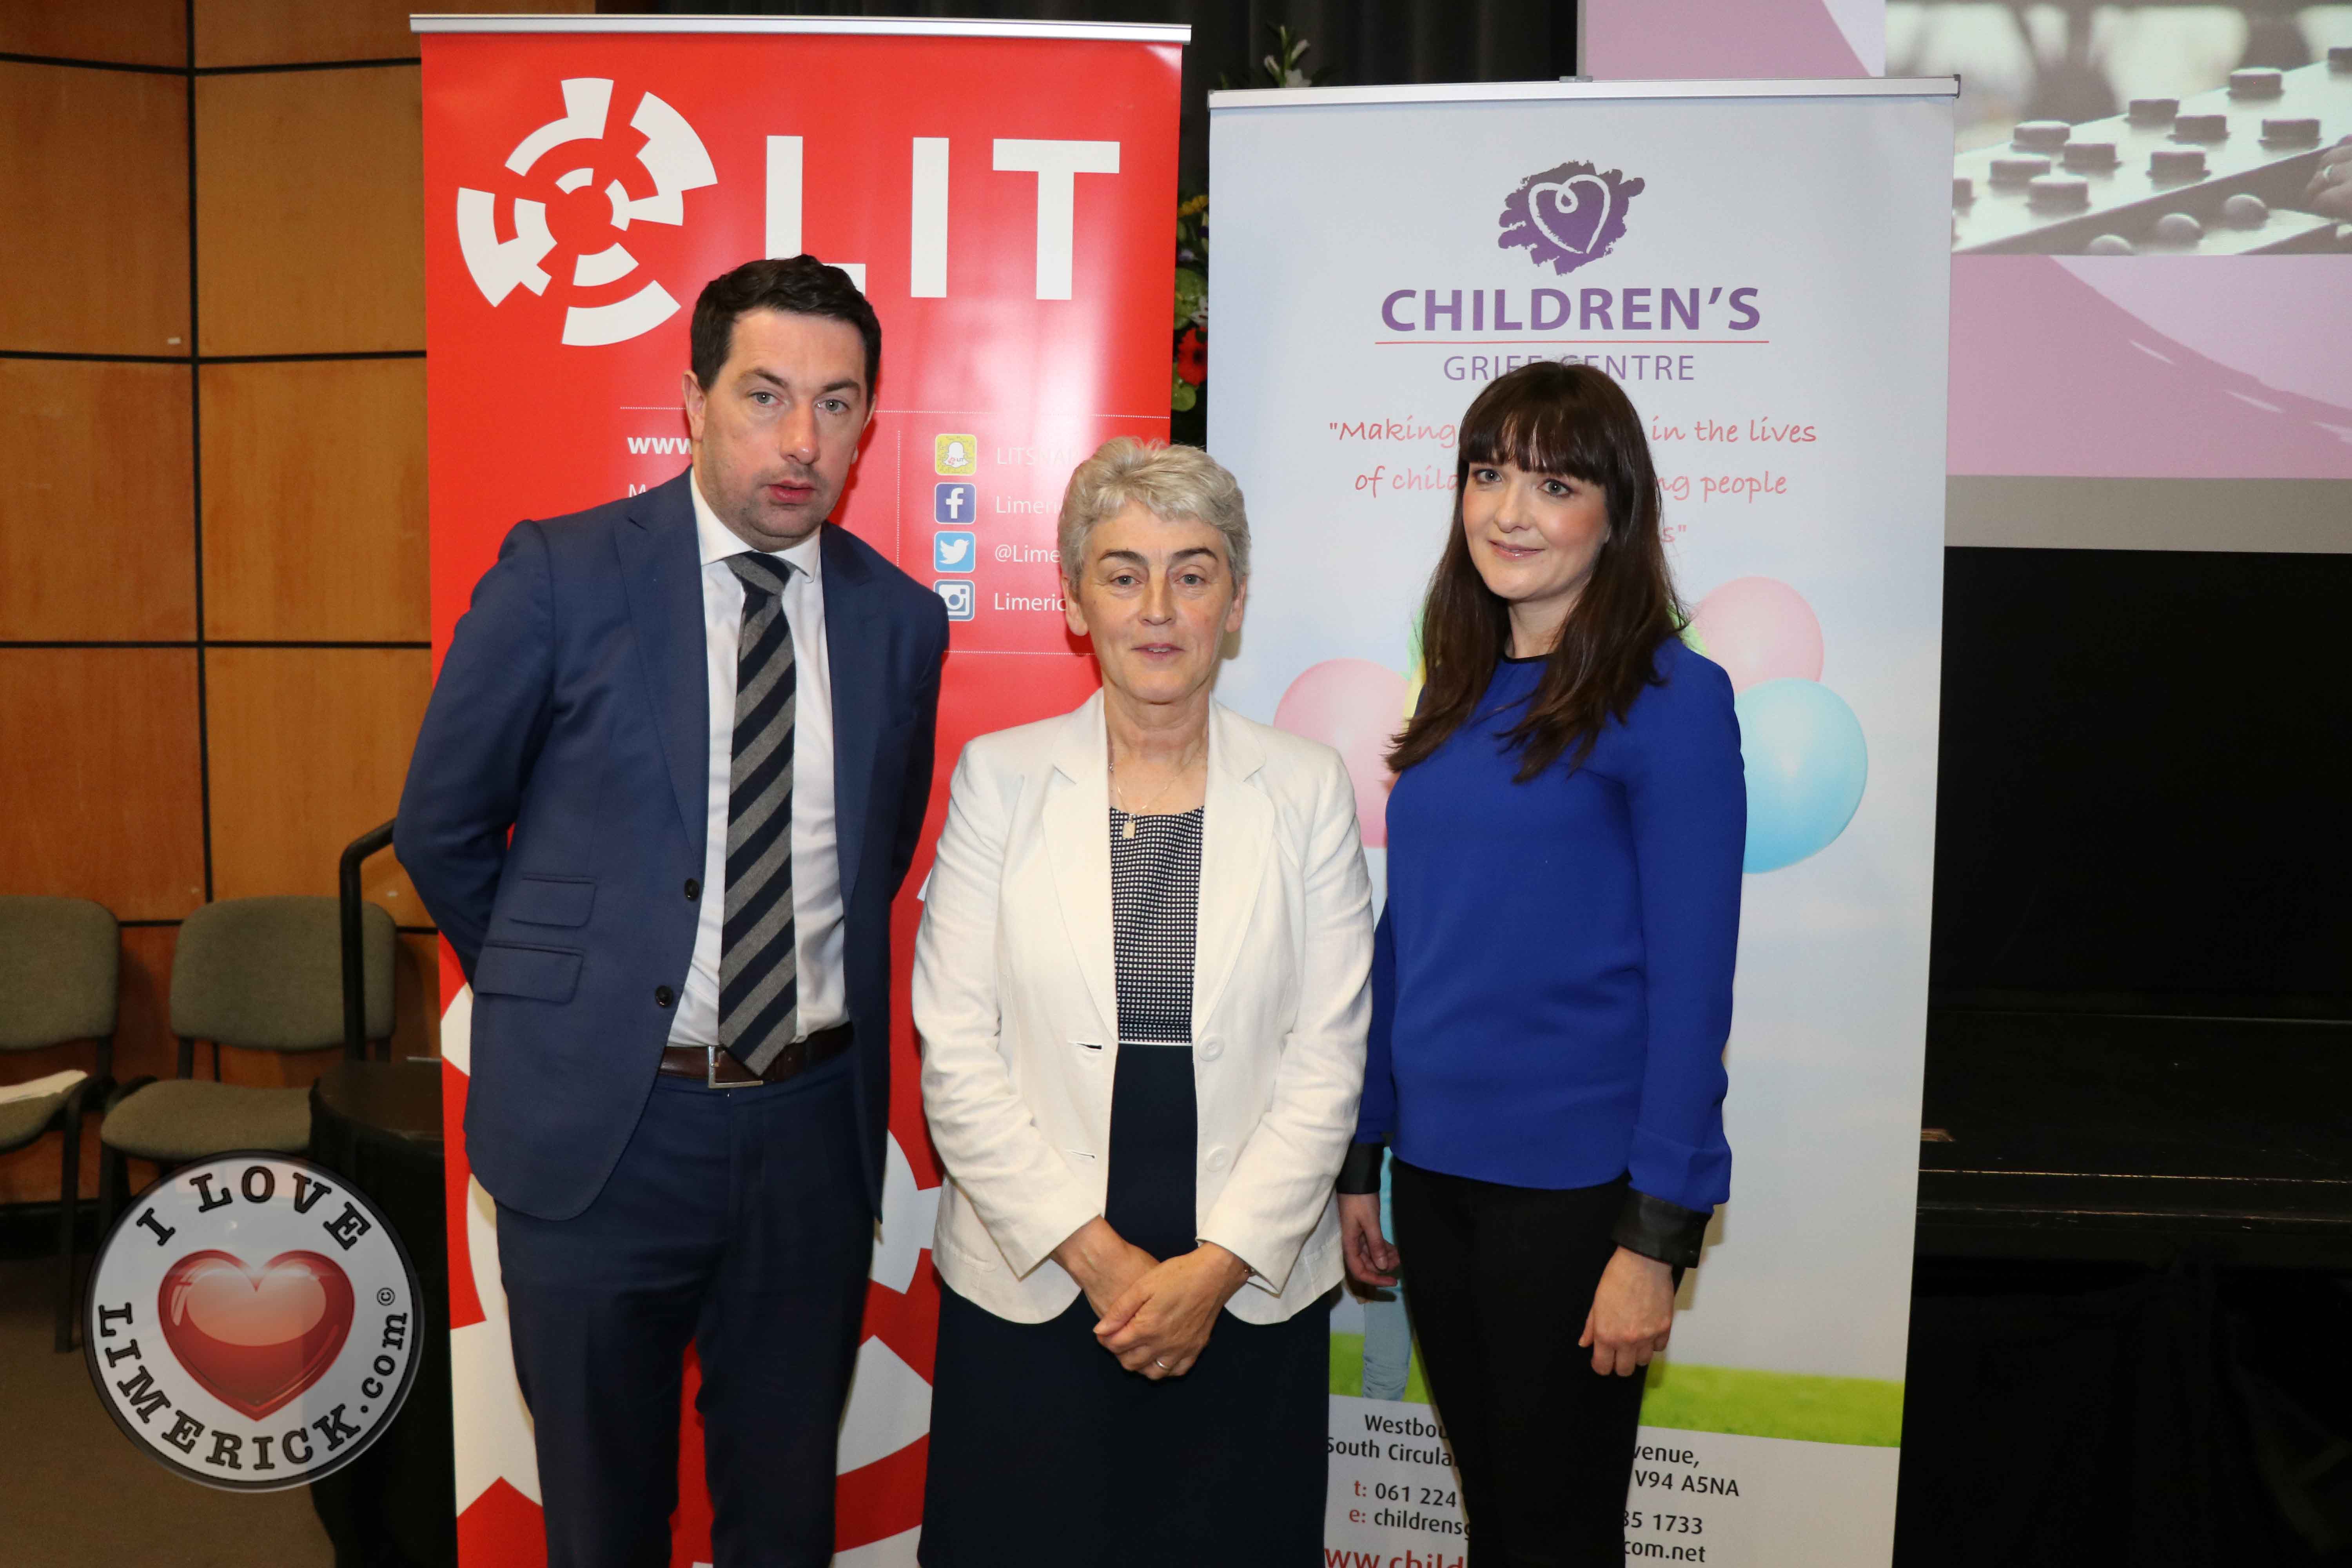 Children and Loss Conference 2019